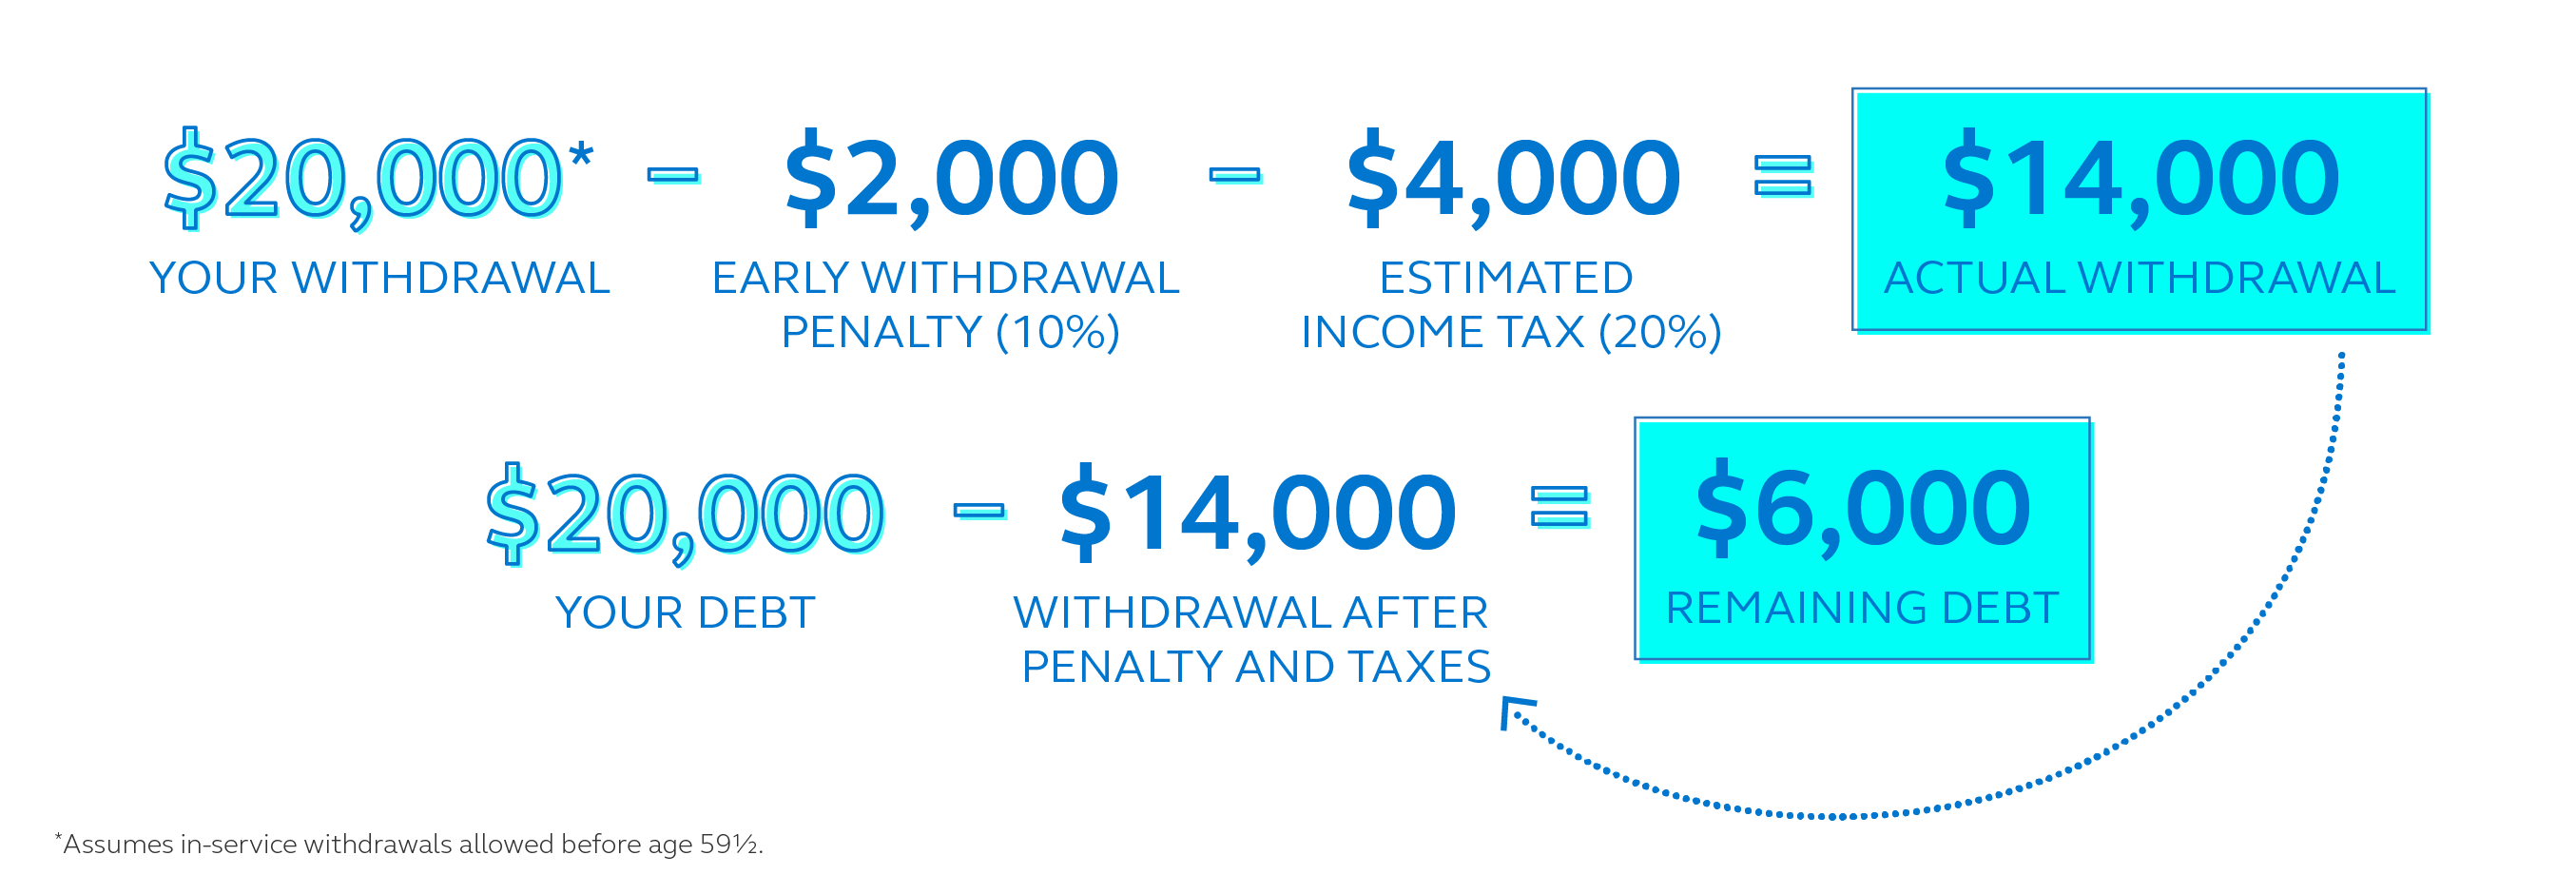 Graphic showing a $20,000 withdrawal with a $2000 early withdrawal penalty minus a $4000 income tax will net $14,000. If you have $20,000 in debt, you will still be short $6000 after withdrawal.